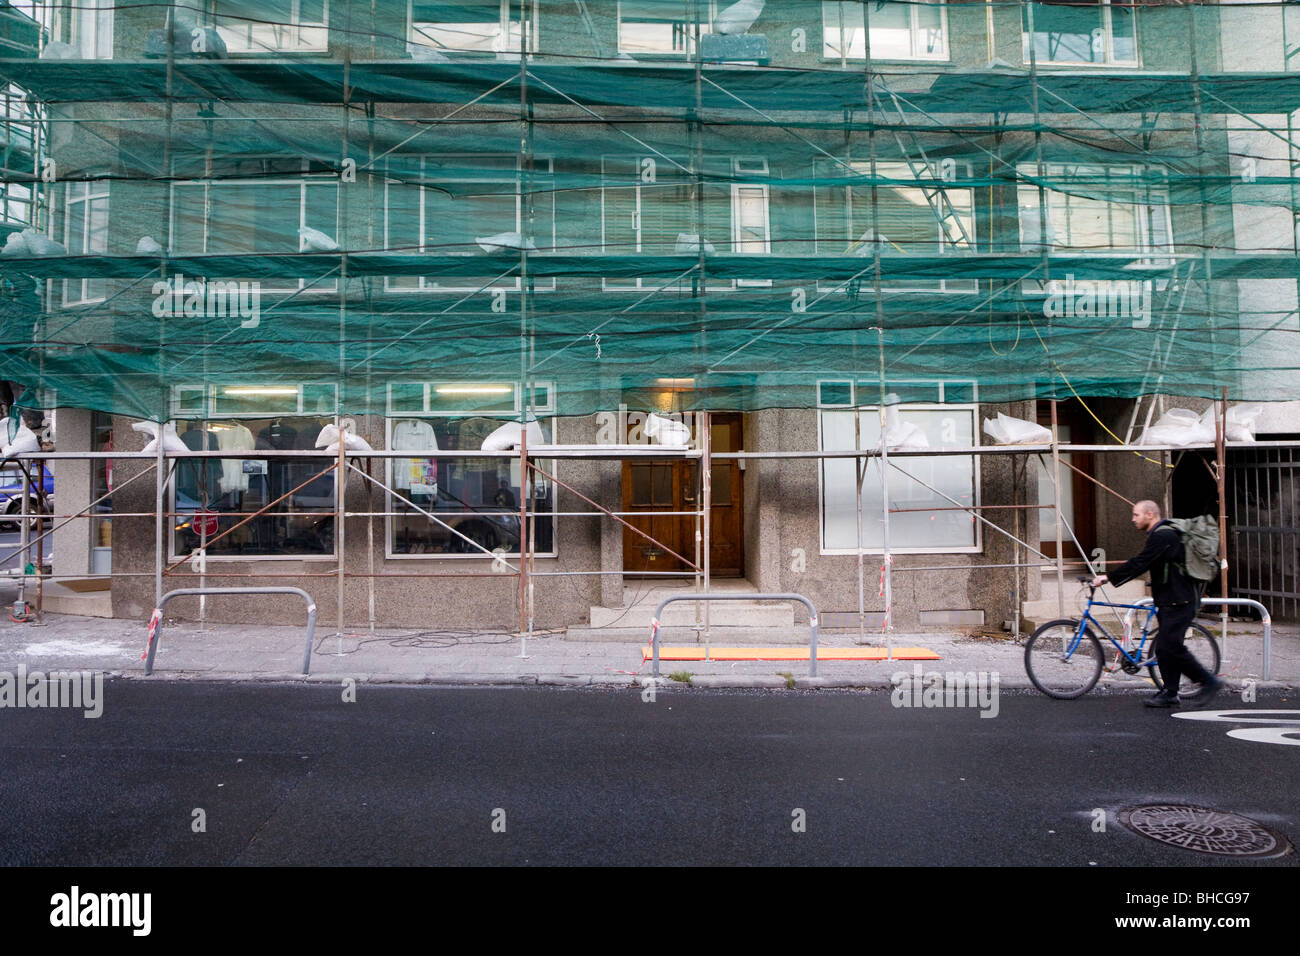 Scaffolding outside a house being repaired, man walking past. Reykjavik Iceland Stock Photo